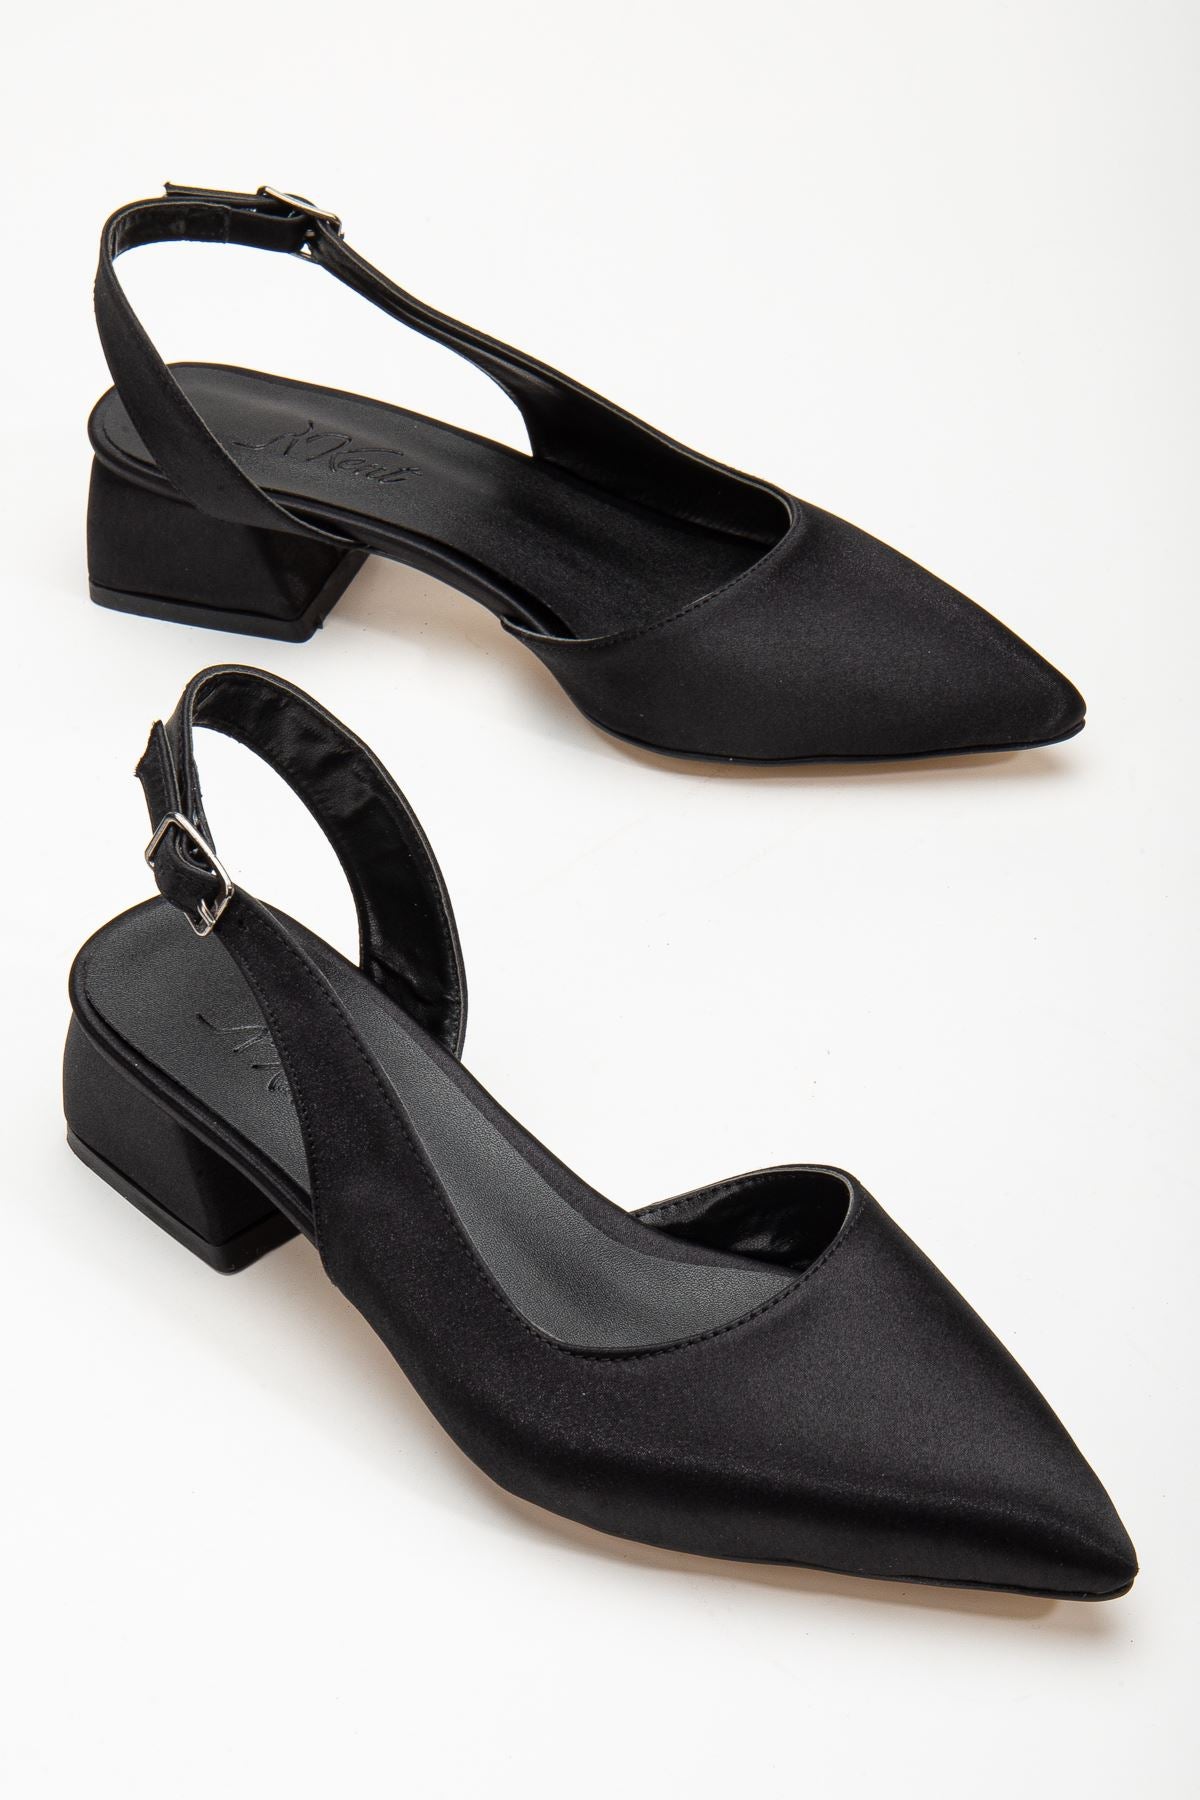 Ossie Black Satin Women's Heeled Shoes - STREETMODE™